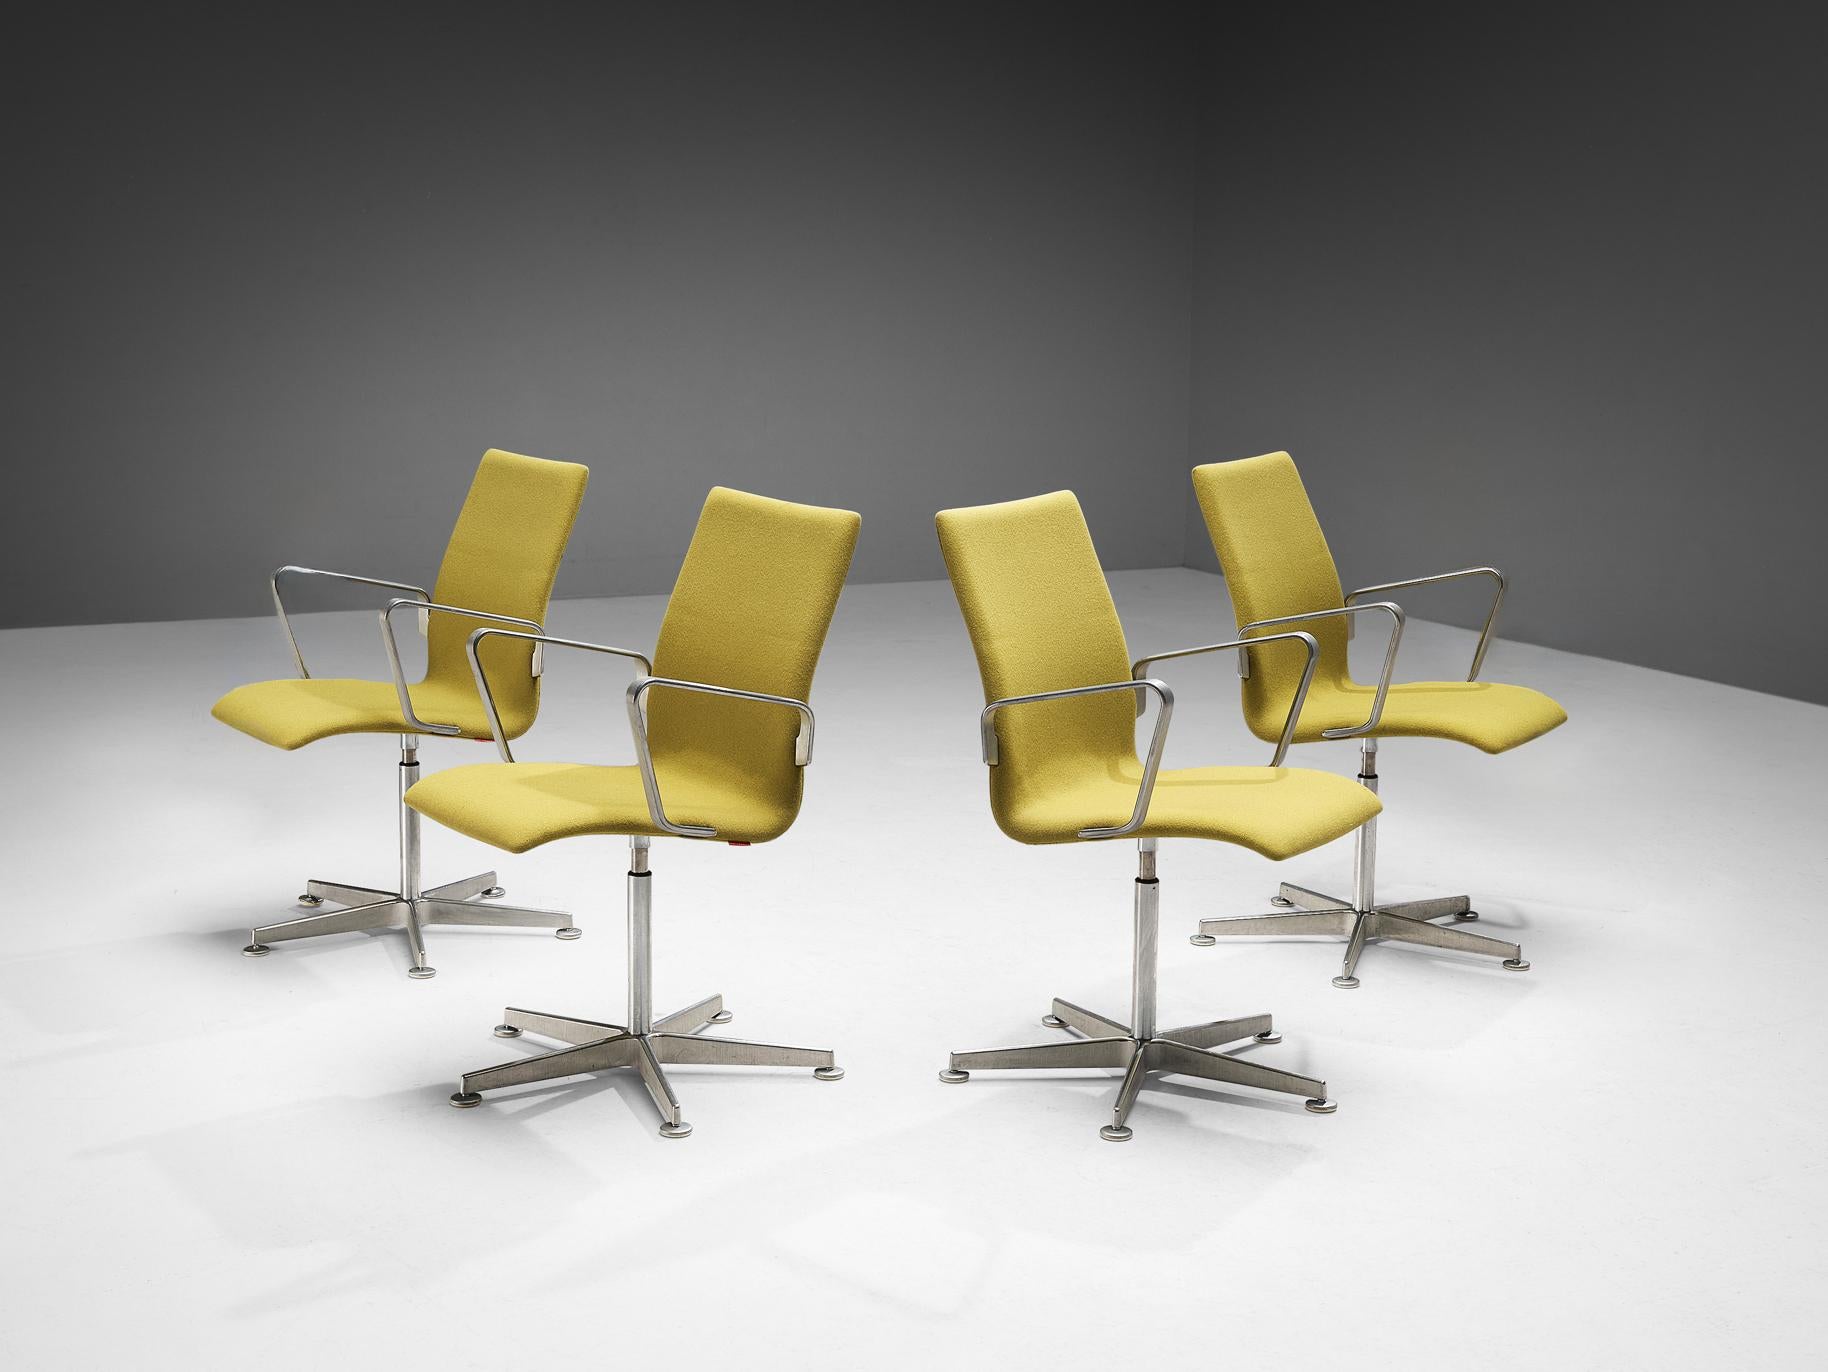 Arne Jacobsen for Fritz Hansen, set of four 'Oxford' chairs, metal, yellow fabric, Denmark, design 1965, later production

These classic executive office chairs feature a medium high back (as opposed to the models with a low and a very high back),